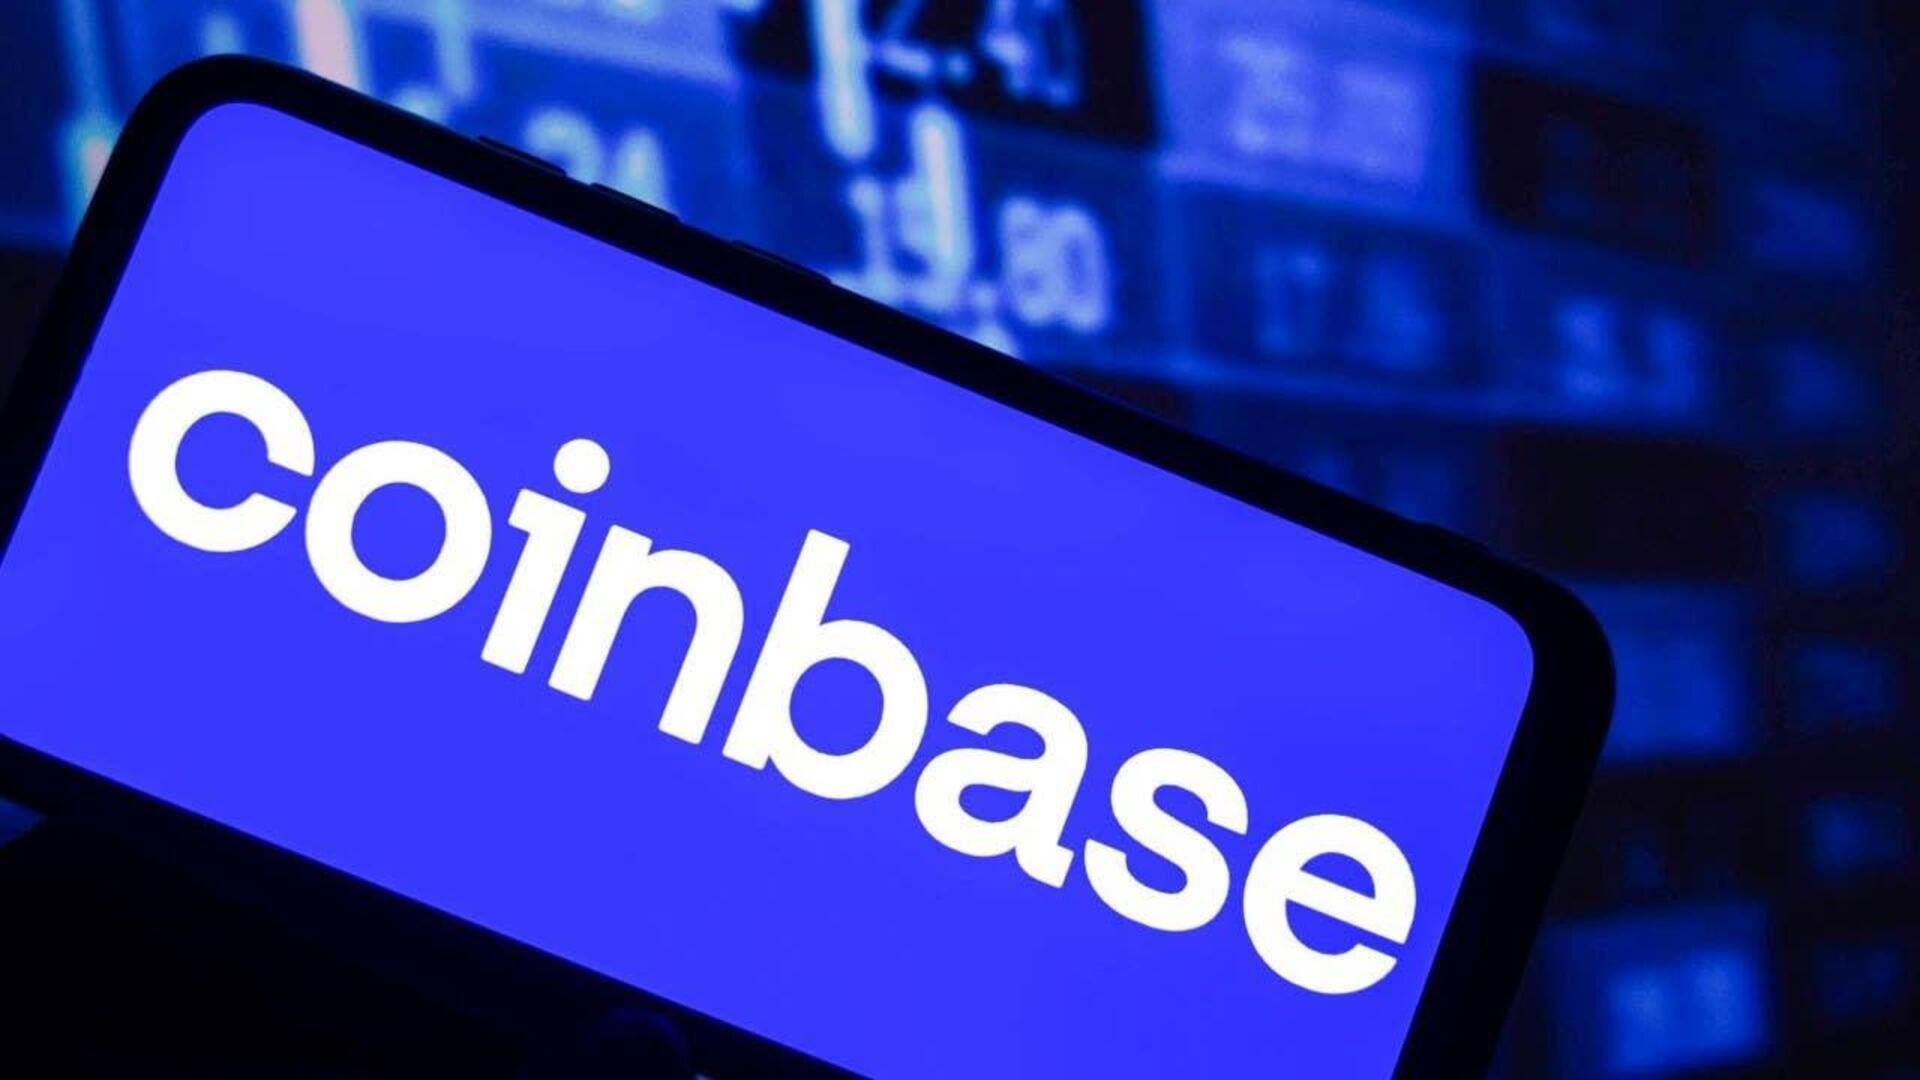 Coinbase to face US lawsuit over unregistered securities sales